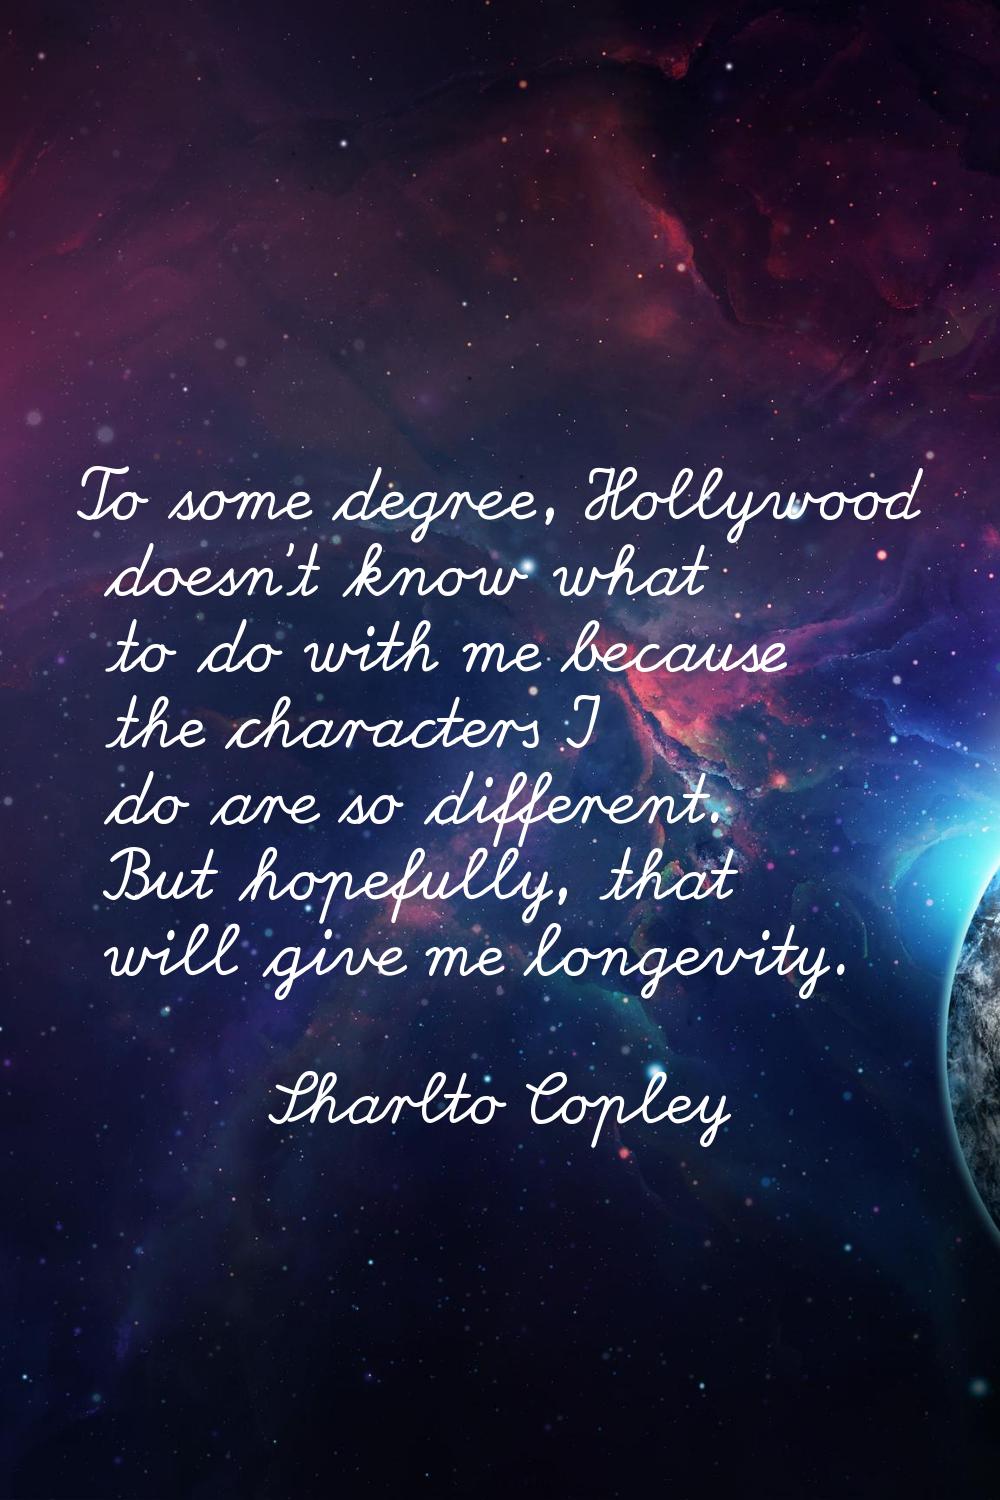 To some degree, Hollywood doesn't know what to do with me because the characters I do are so differ